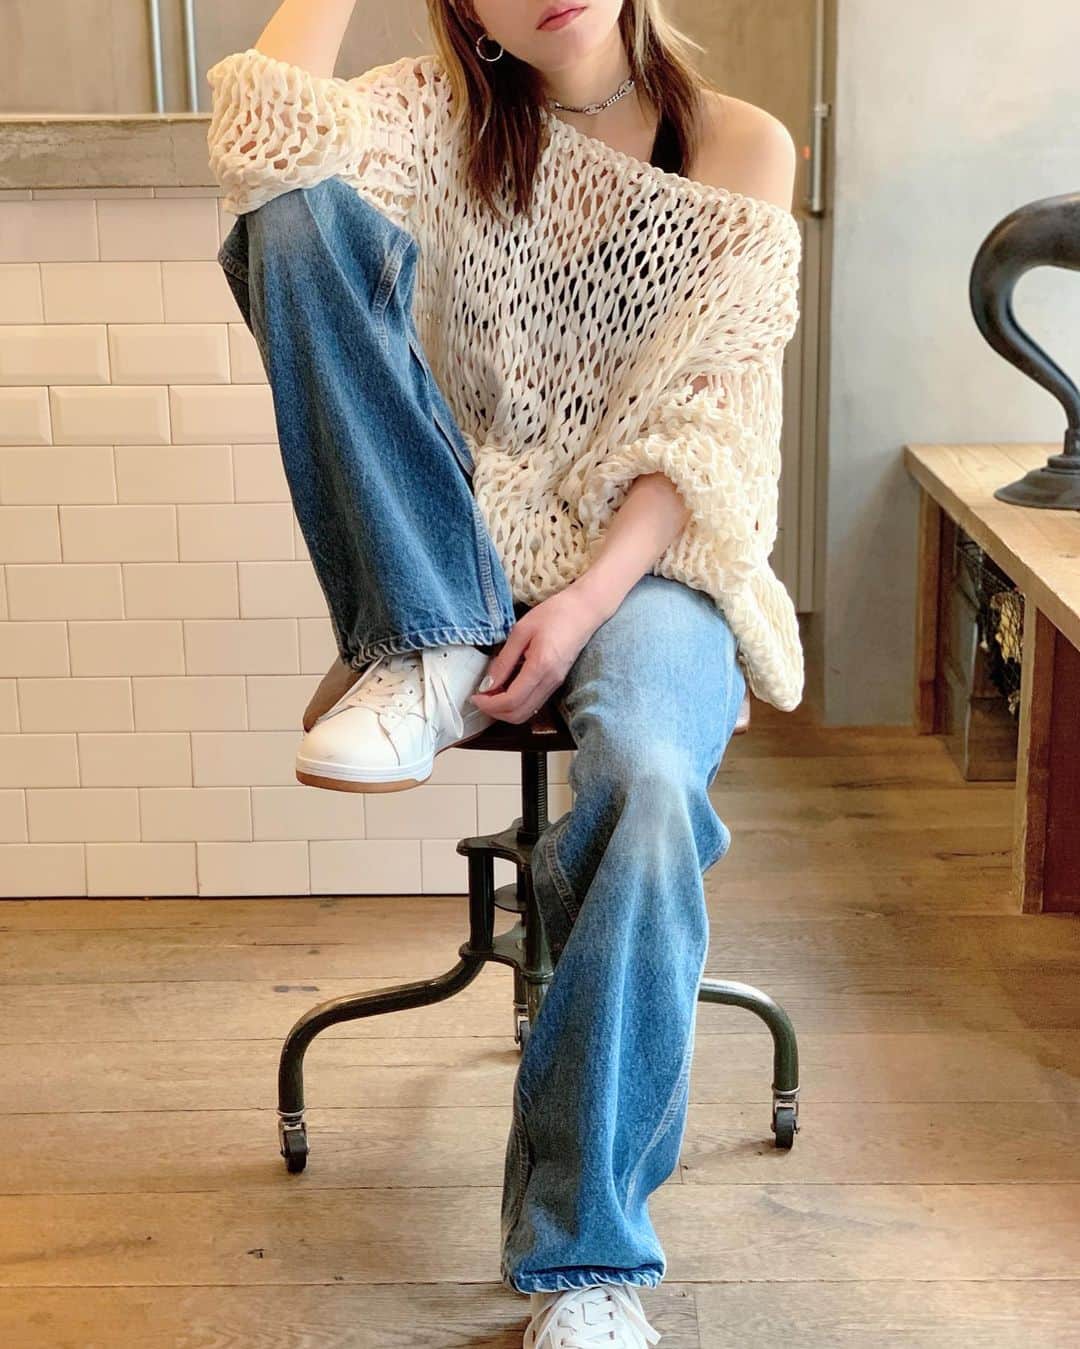 birthdeathさんのインスタグラム写真 - (birthdeathInstagram)「🤍 NEW ARRIVAL 🤍  TOFFS - Off white hand knitted cotton fishnet sweater《Made in France》  ご好評を頂いております birthdeathオリジナルプロダクト『フィッシュネットセーター』の新作コットンニットバージョンが入荷いたしました！  コットン100%素材を使用し、手作業で丁寧に編み立てられた贅沢なニットセーター。 立体感のあるローゲージのルーズな編み目からヘルシーに素肌が覗き、洗練されたスタイルを演出します。 ナチュラルな風合いのコットン素材のニットは通気性も良く、オールシーズンお楽しみいただけます。  ✔️オンラインストアにも掲載済みです。 是非ご覧になってみてください。  #thetokyofreefashionsociety  #birthdeath  『The Tokyo Free Fashion Society (TOFFS) 』is an original product that is manufactured irregularly.  This is a high-quality sweater made of 100% cotton and knitted by hand. The healthy bare skin peeping through the three-dimensional low gauge mesh creates a sophisticated style. Natural cotton knitwear is breathable and can be enjoyed regardless of season.  A cotton fishnet sweater made by hand, commissioned by a skilled knitting artist who lives in France and has a career of more than 50 years. Since all the processes are done by hand in France, the production volume is limited and we sell them in limited quantities.  ✔️ It has already been posted on our online store. Please take a look.」5月12日 17時46分 - birthdeath_tokyo